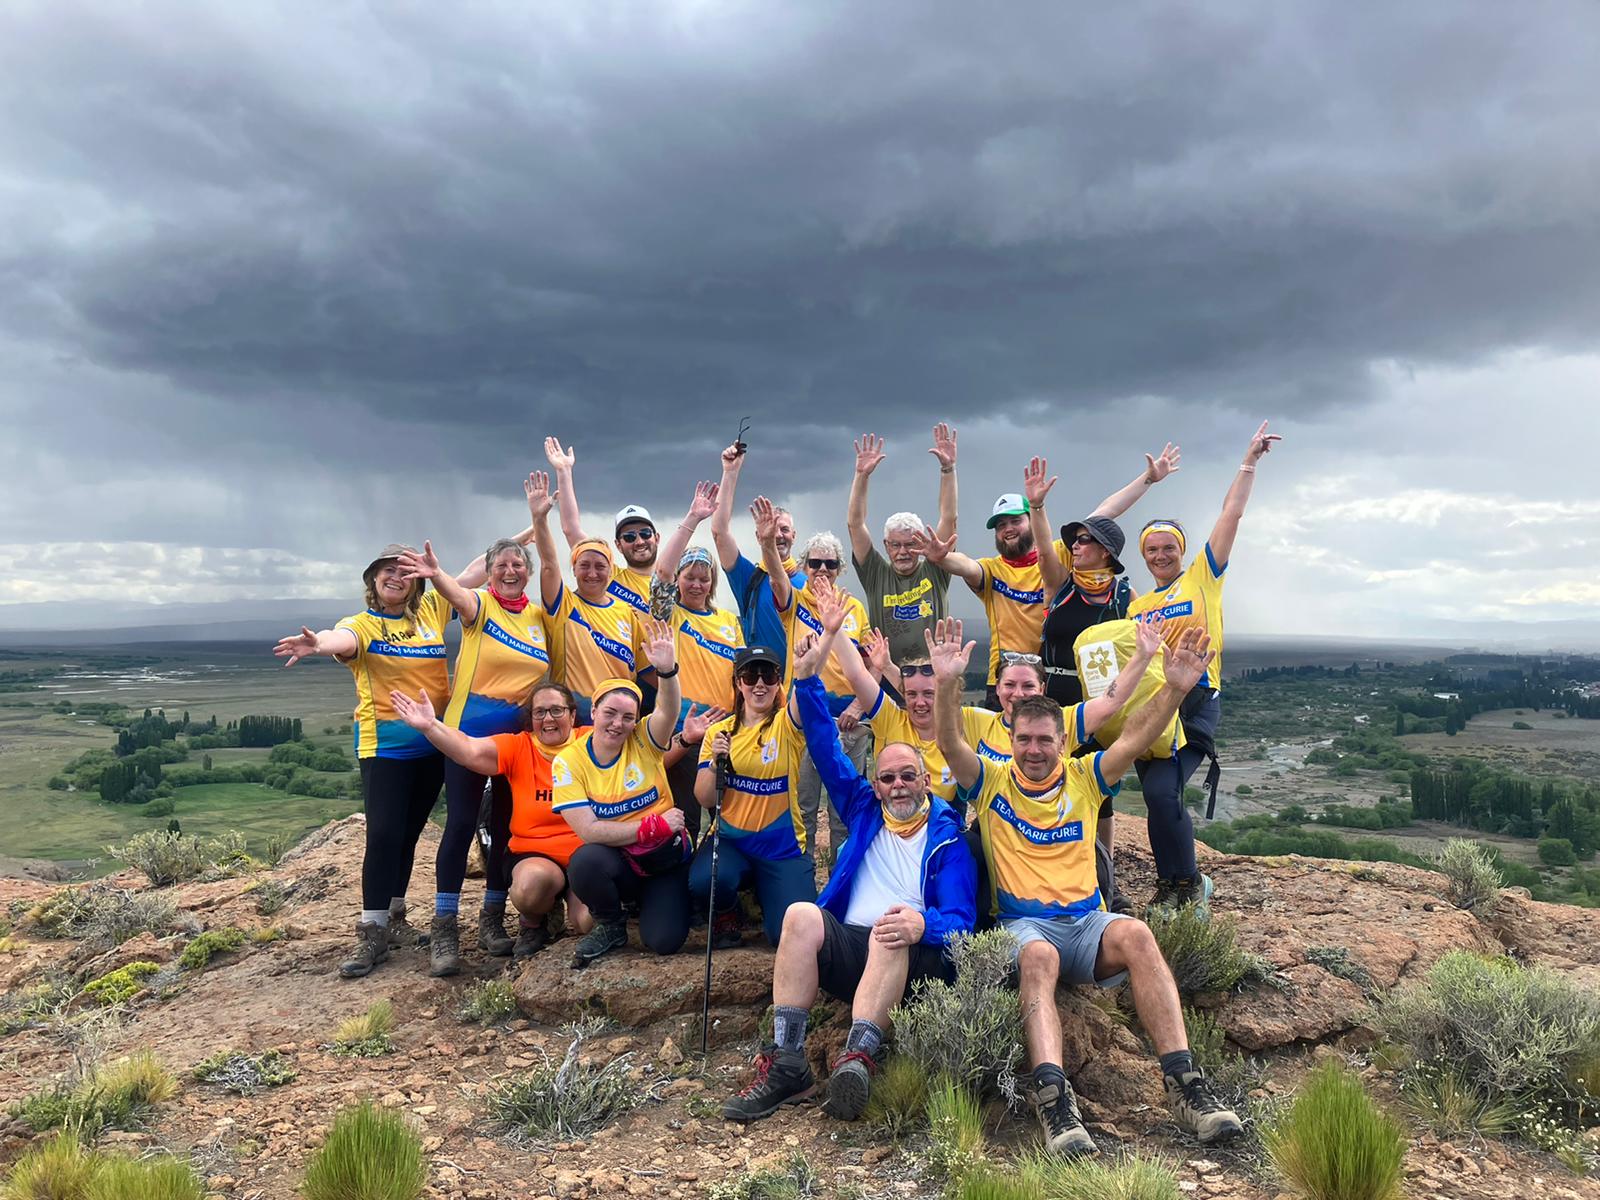 Over £200k raised & counting from our Marie Curie Patagonia treks!